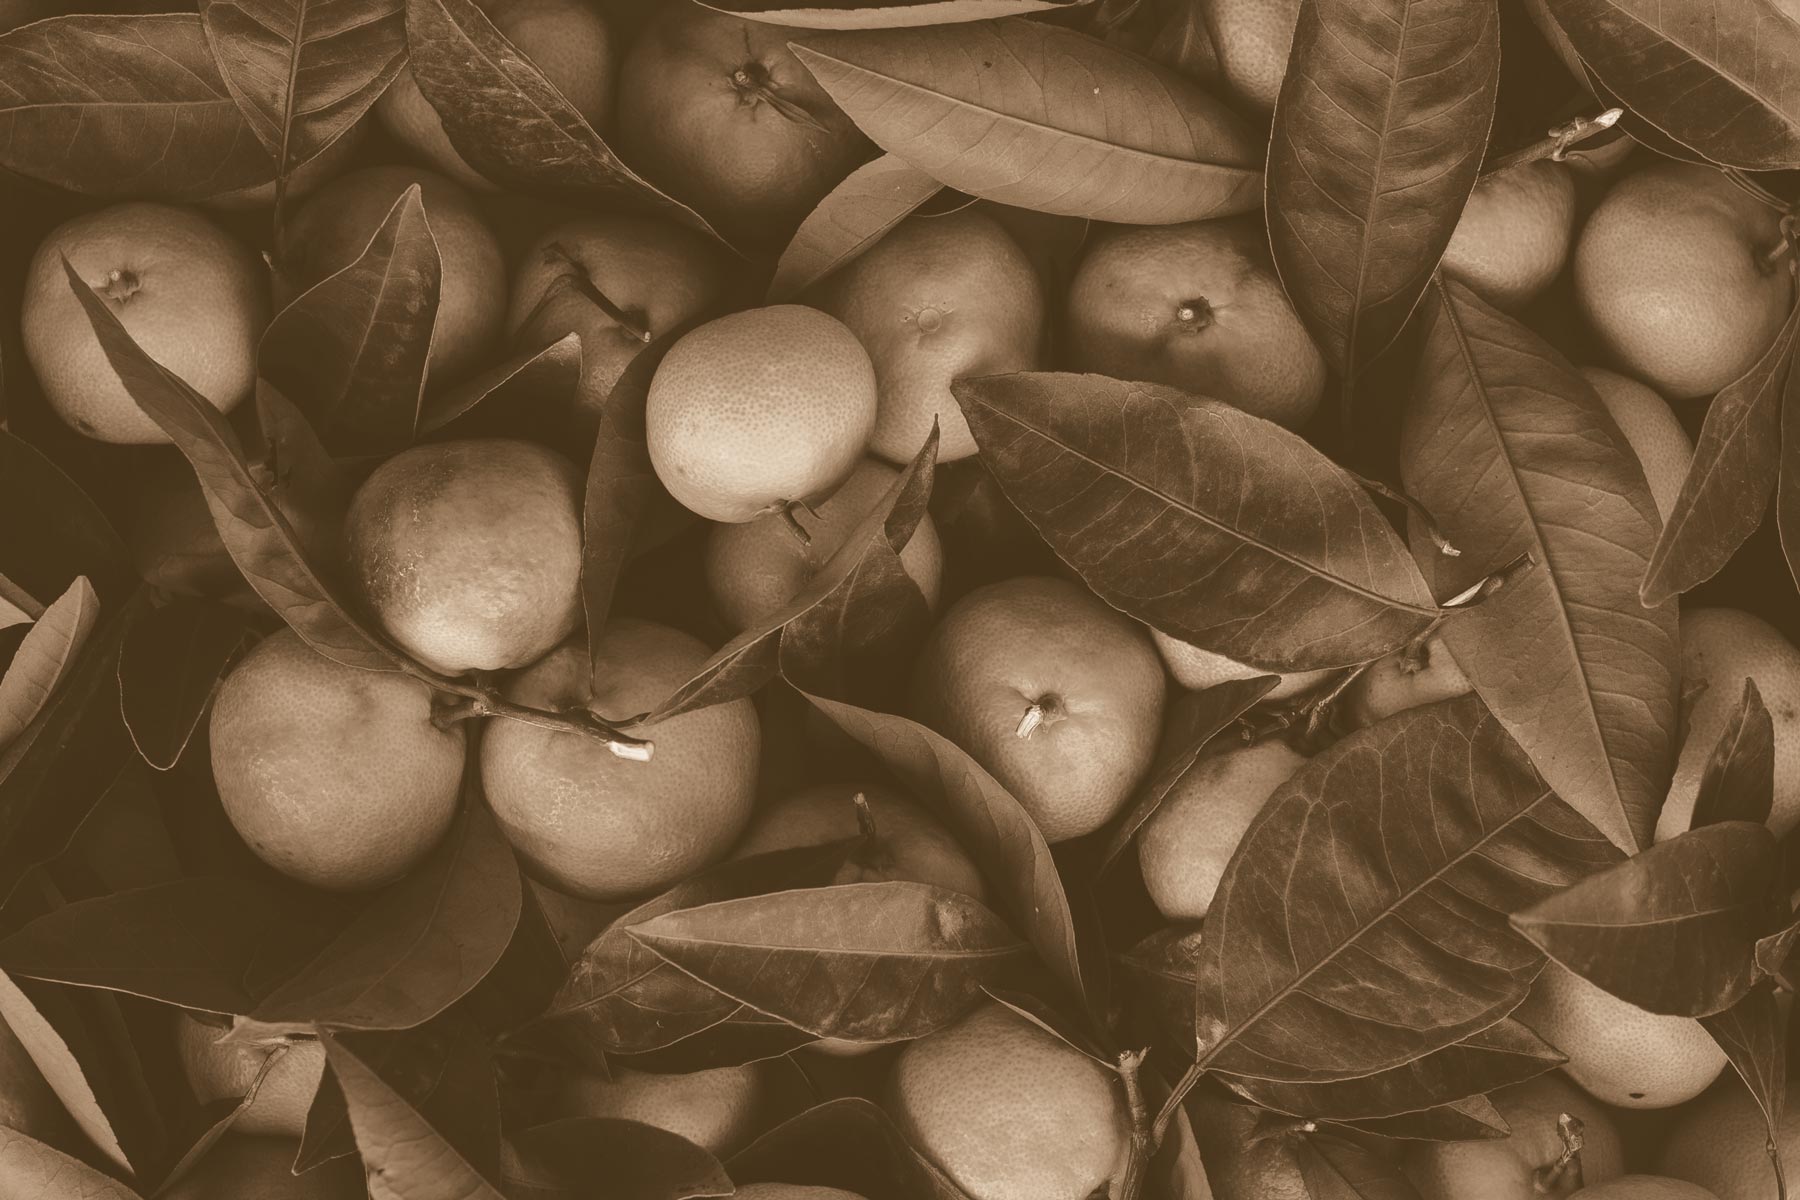 Sepia-toned photo of a pile of oranges and orange tree leaves.